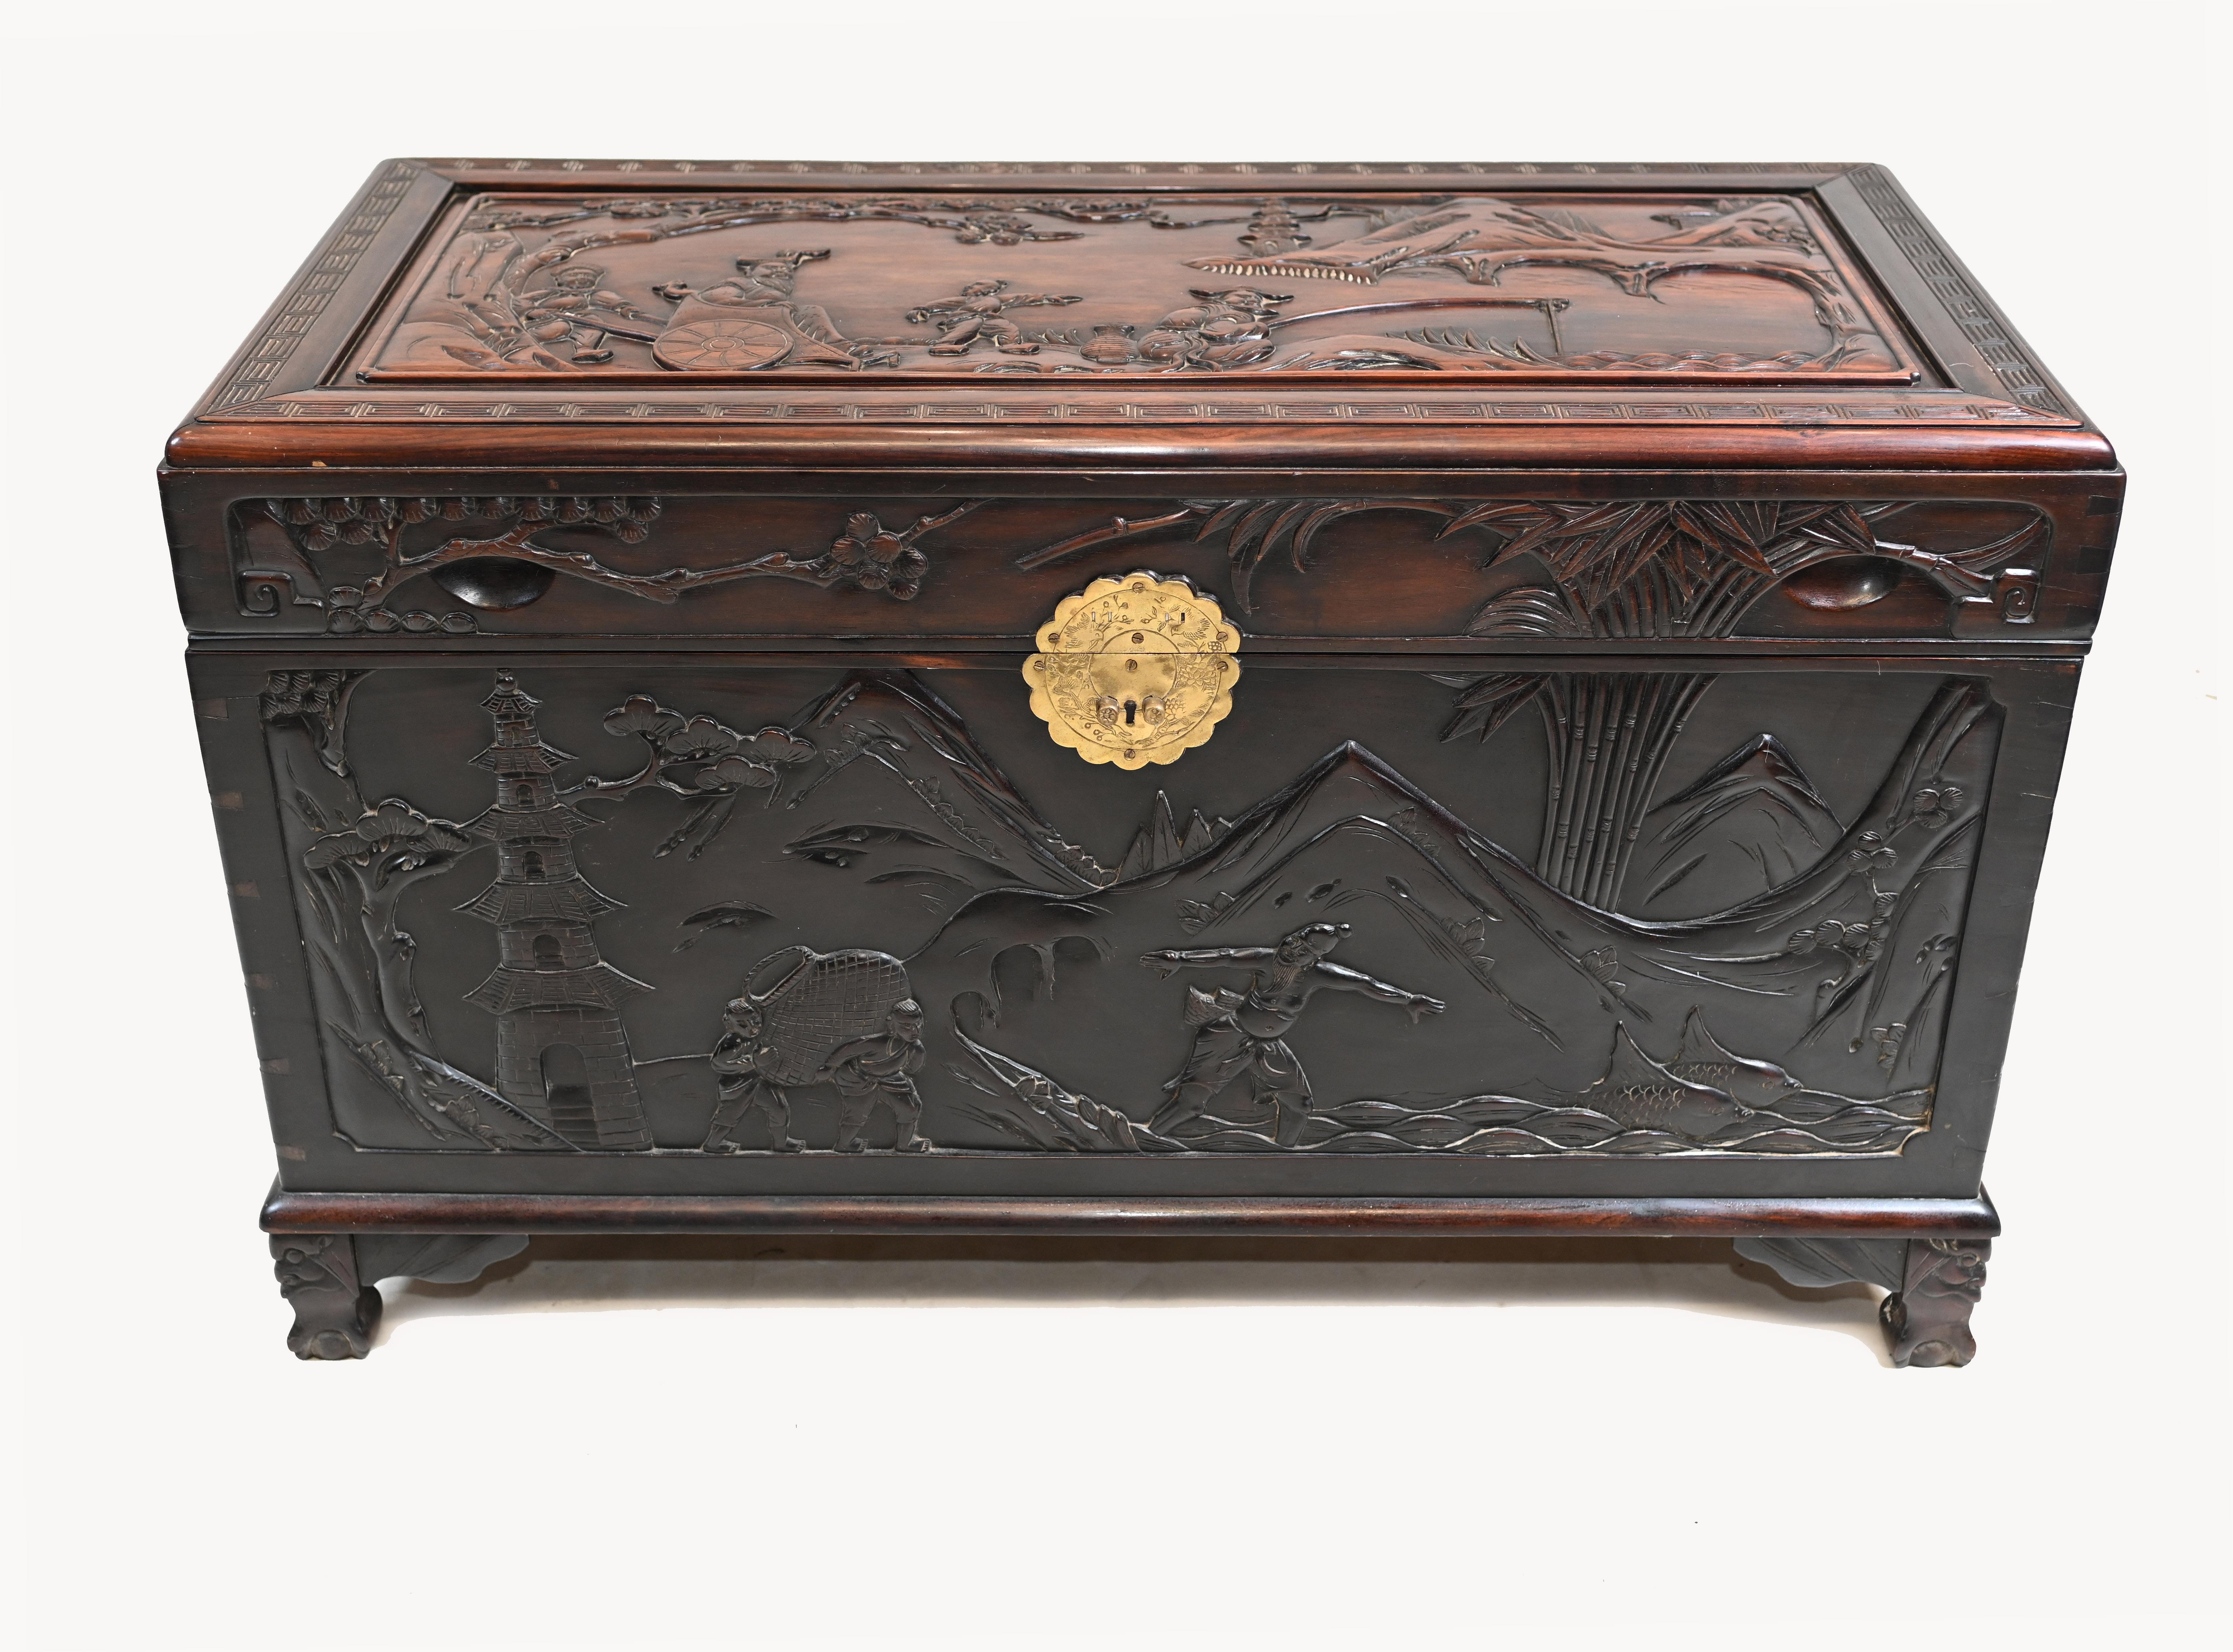 A rare Chinese hardwood camphor chest with carved scenes circa 1880
Good size and very solid.
Carving is particularly detailed showing Chinese scenes.
Offered in great shape ready for home use right away.
We ship to every corner of the planet.
 